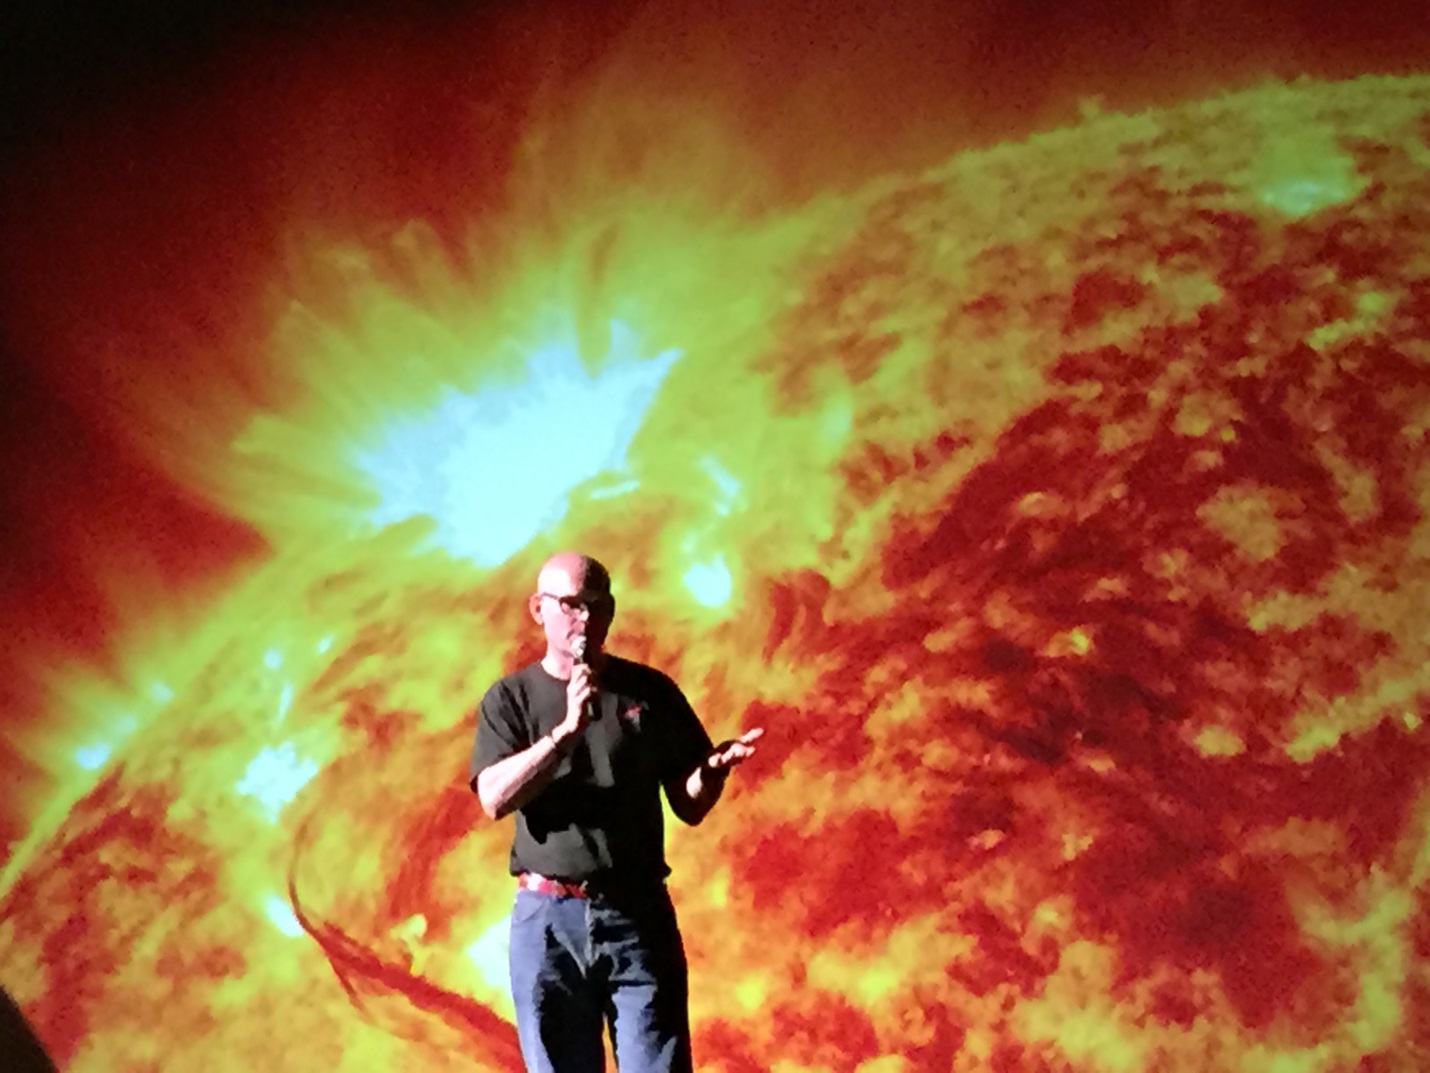 Alex Young talks about heliophysics in front of a “Solarium” backdrop at the World Science Festival in New York City.